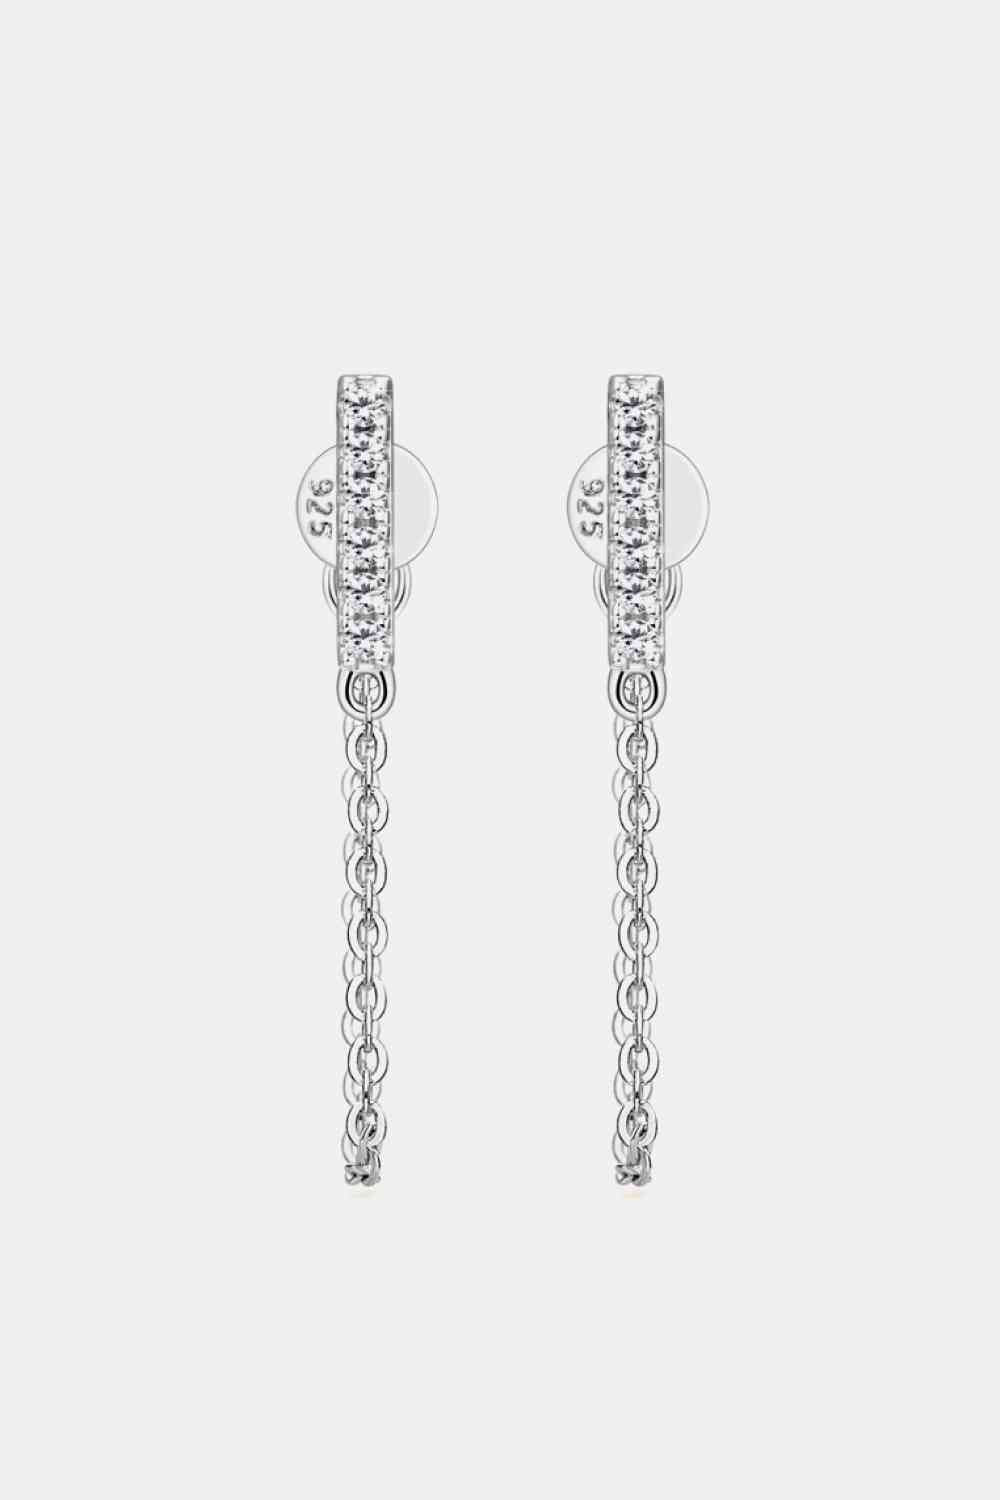 Moissanite 925 Sterling Silver Connected Earrings - Shop Tophatter Deals, Electronics, Fashion, Jewelry, Health, Beauty, Home Decor, Free Shipping